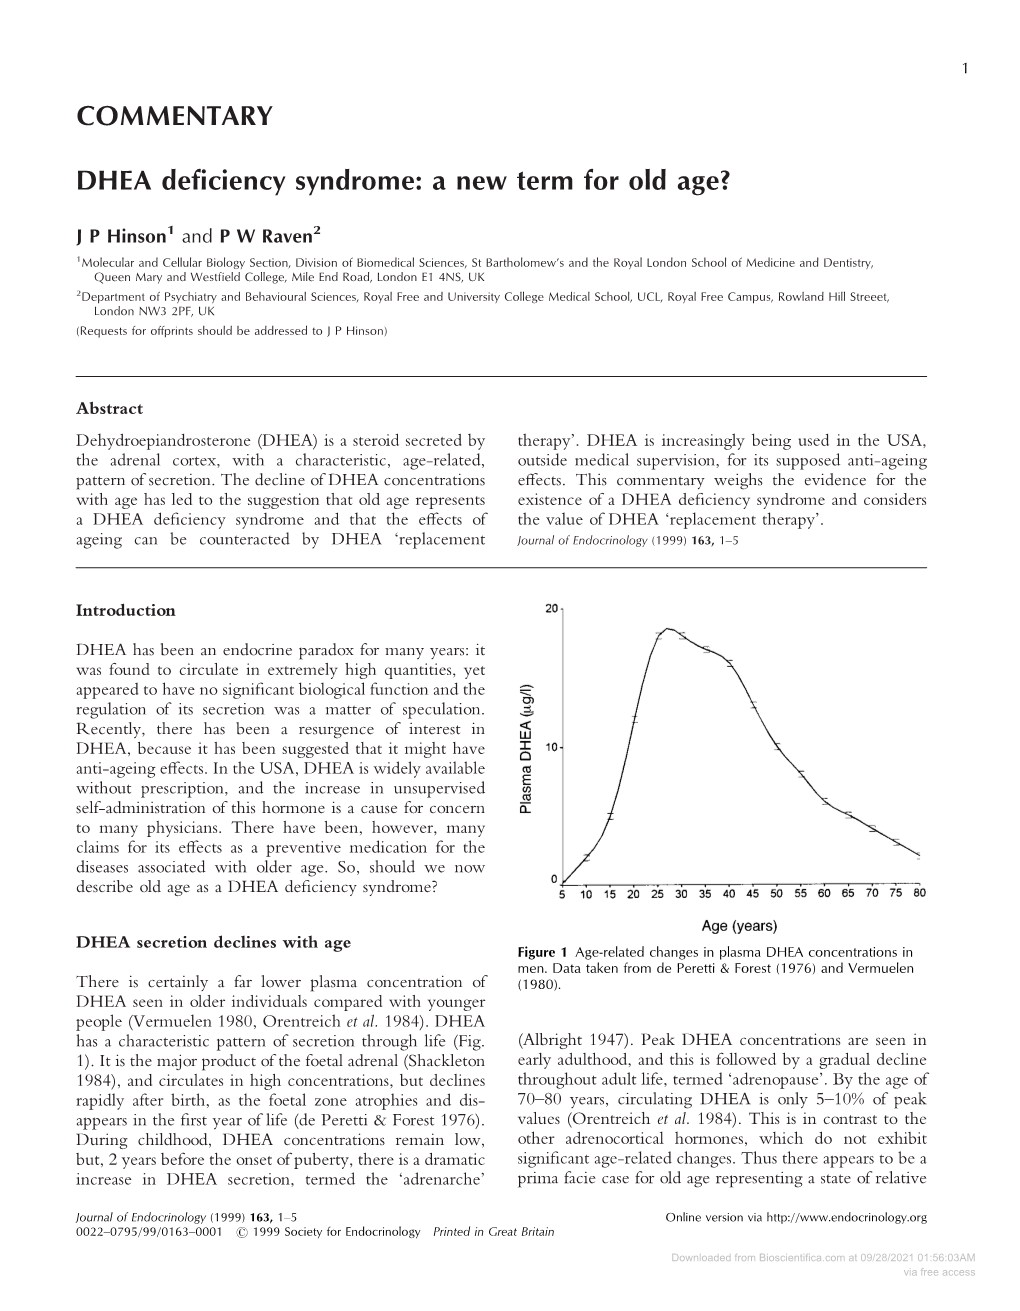 COMMENTARY DHEA Deficiency Syndrome